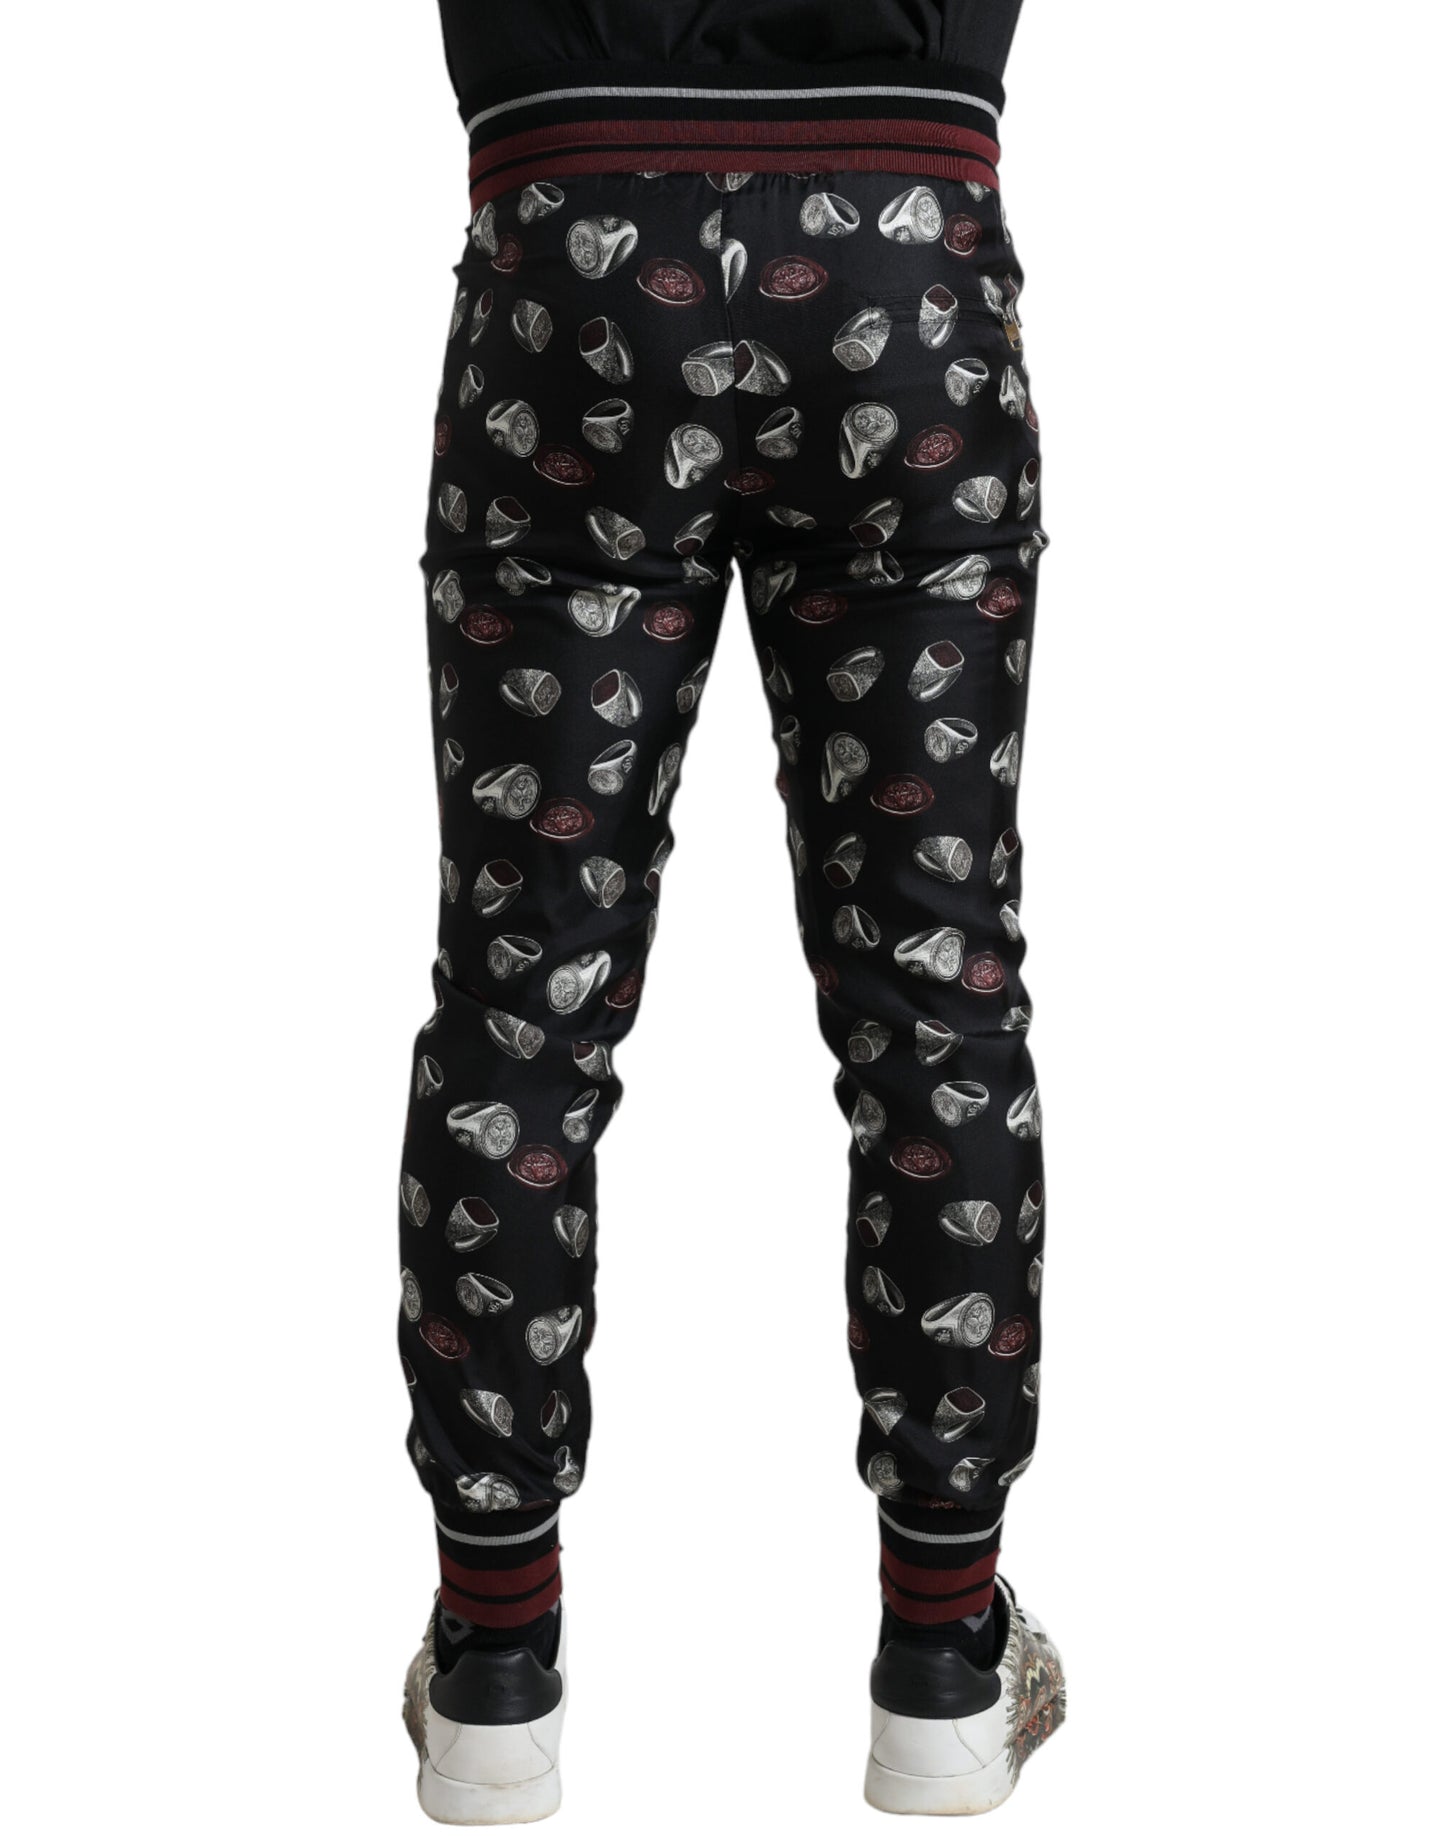 Elegant Silk Jogging Trousers with Ring Print